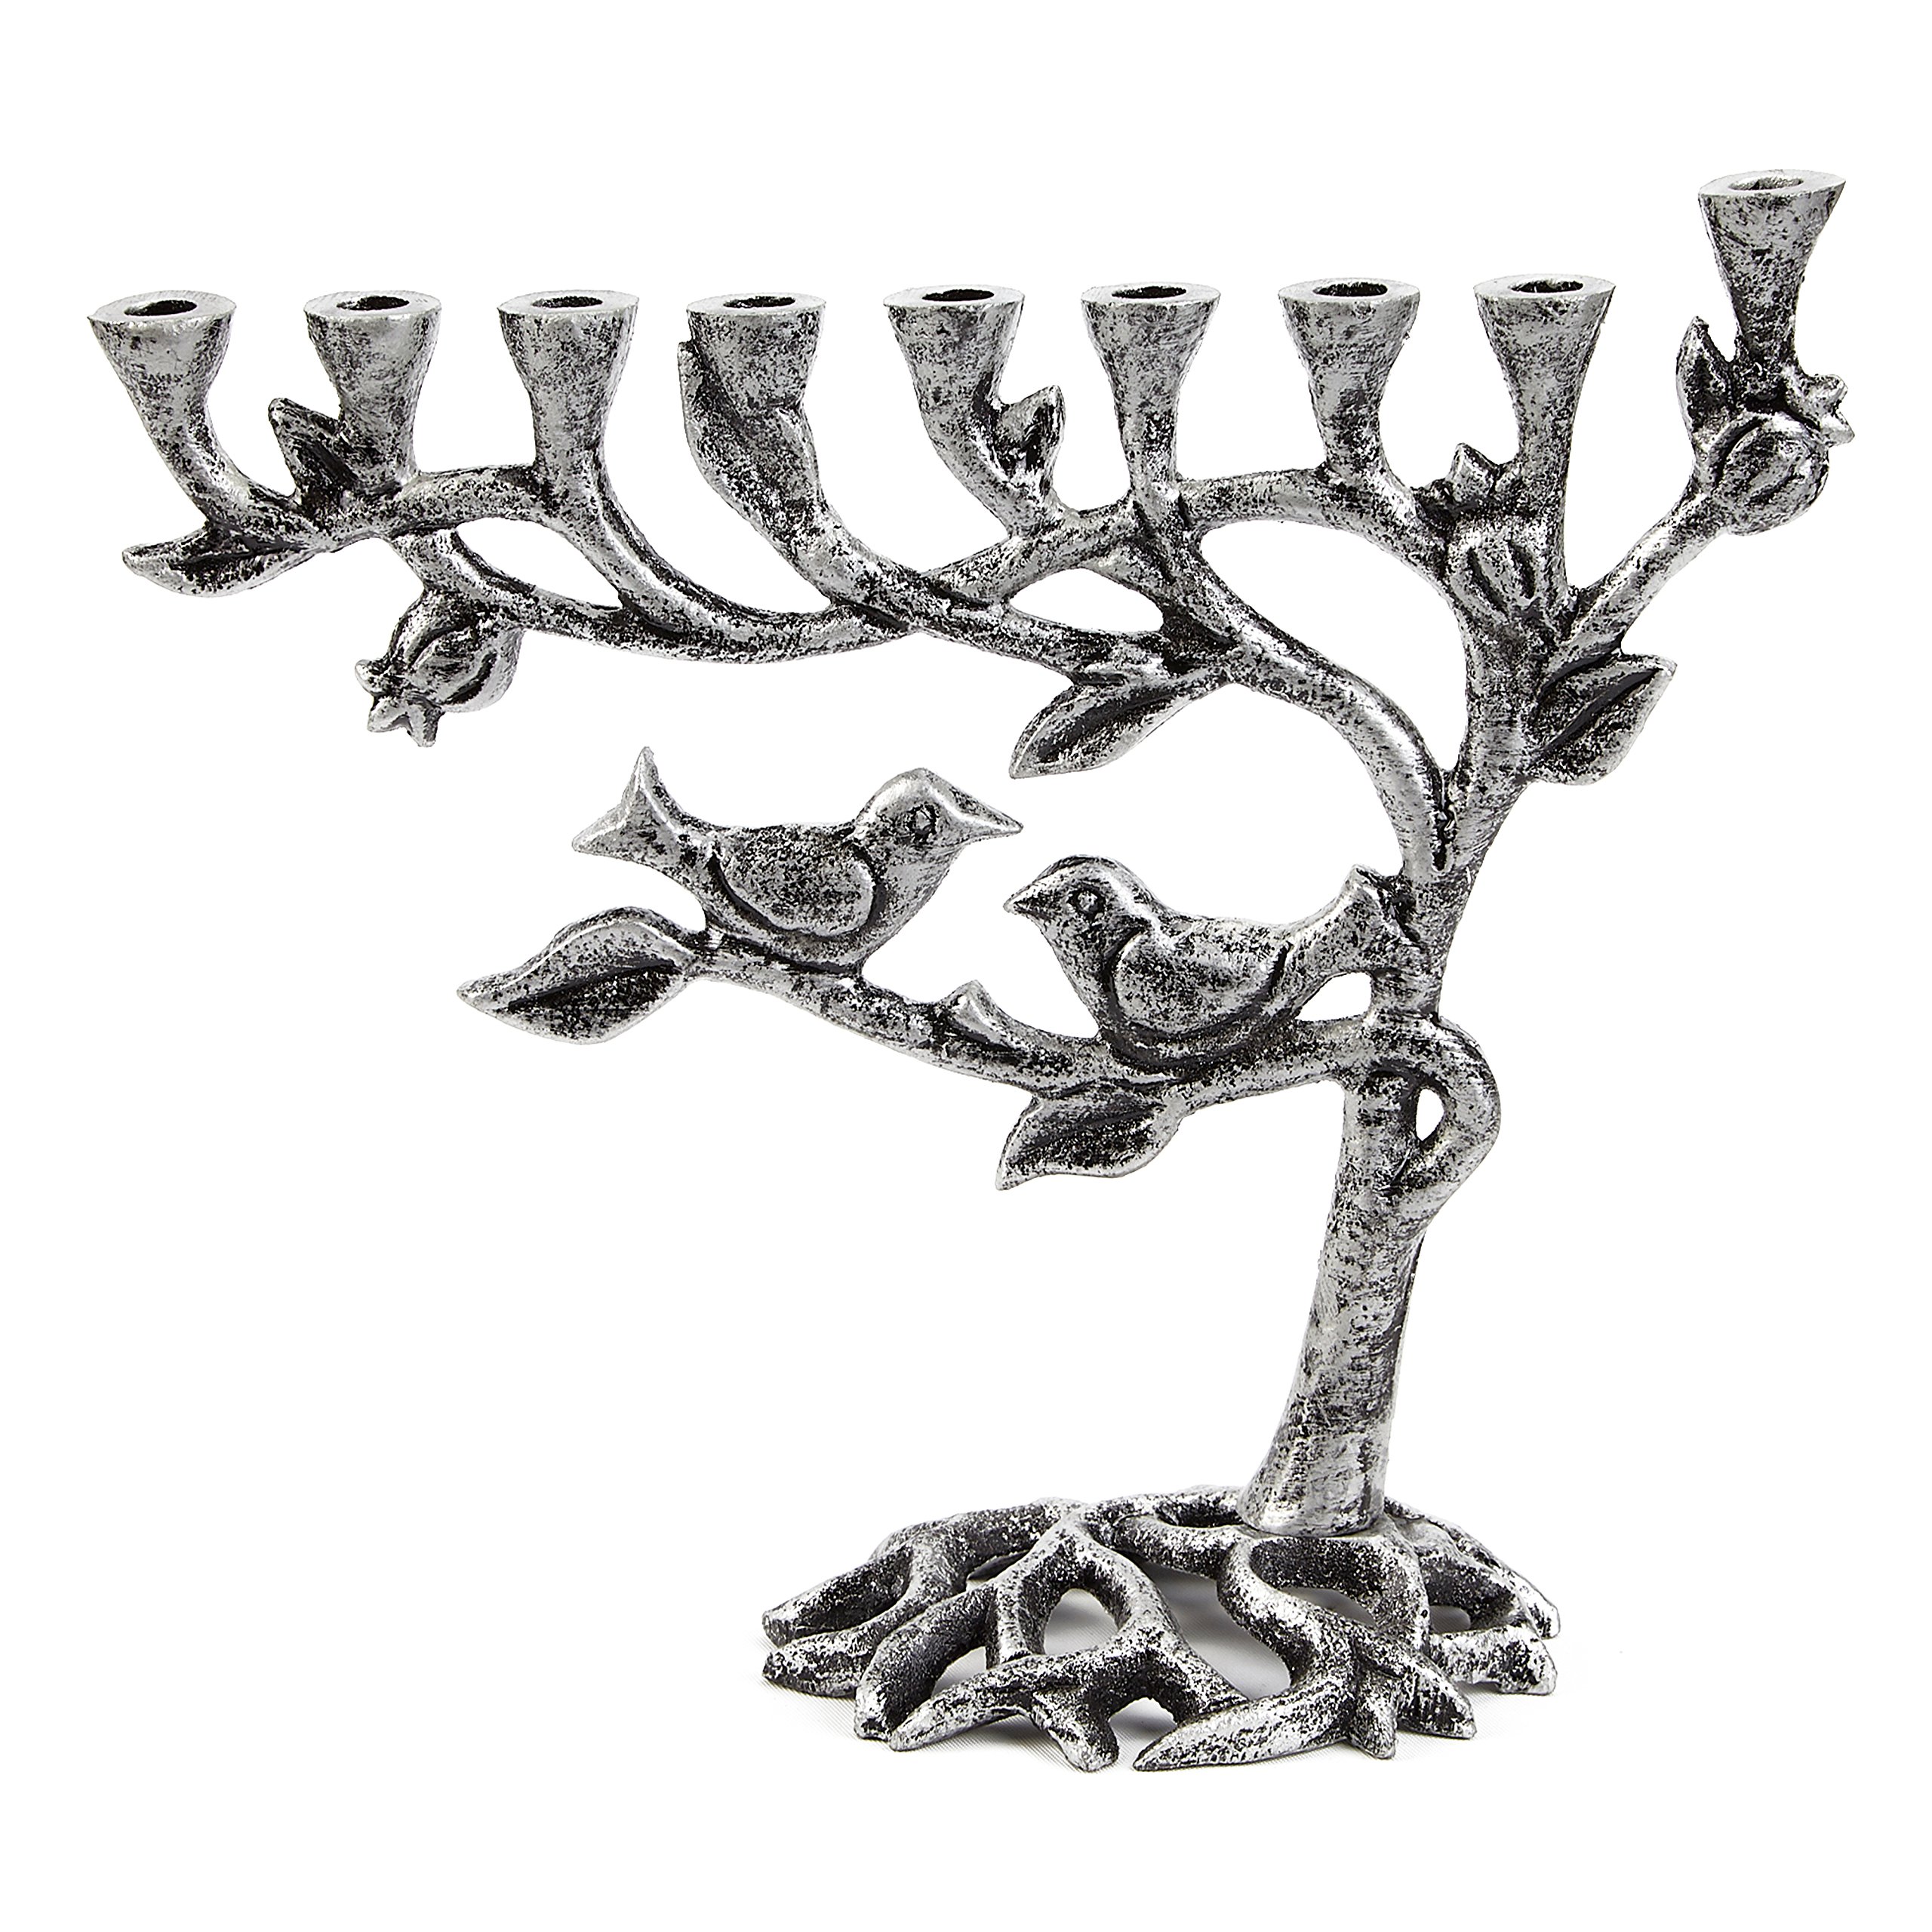 Ner Mitzvah Vintage Aluminum Candle Menorah - Fits All Standard Chanukah Candles - Tree of Life Design with Antique Silver Finish - by Ner M